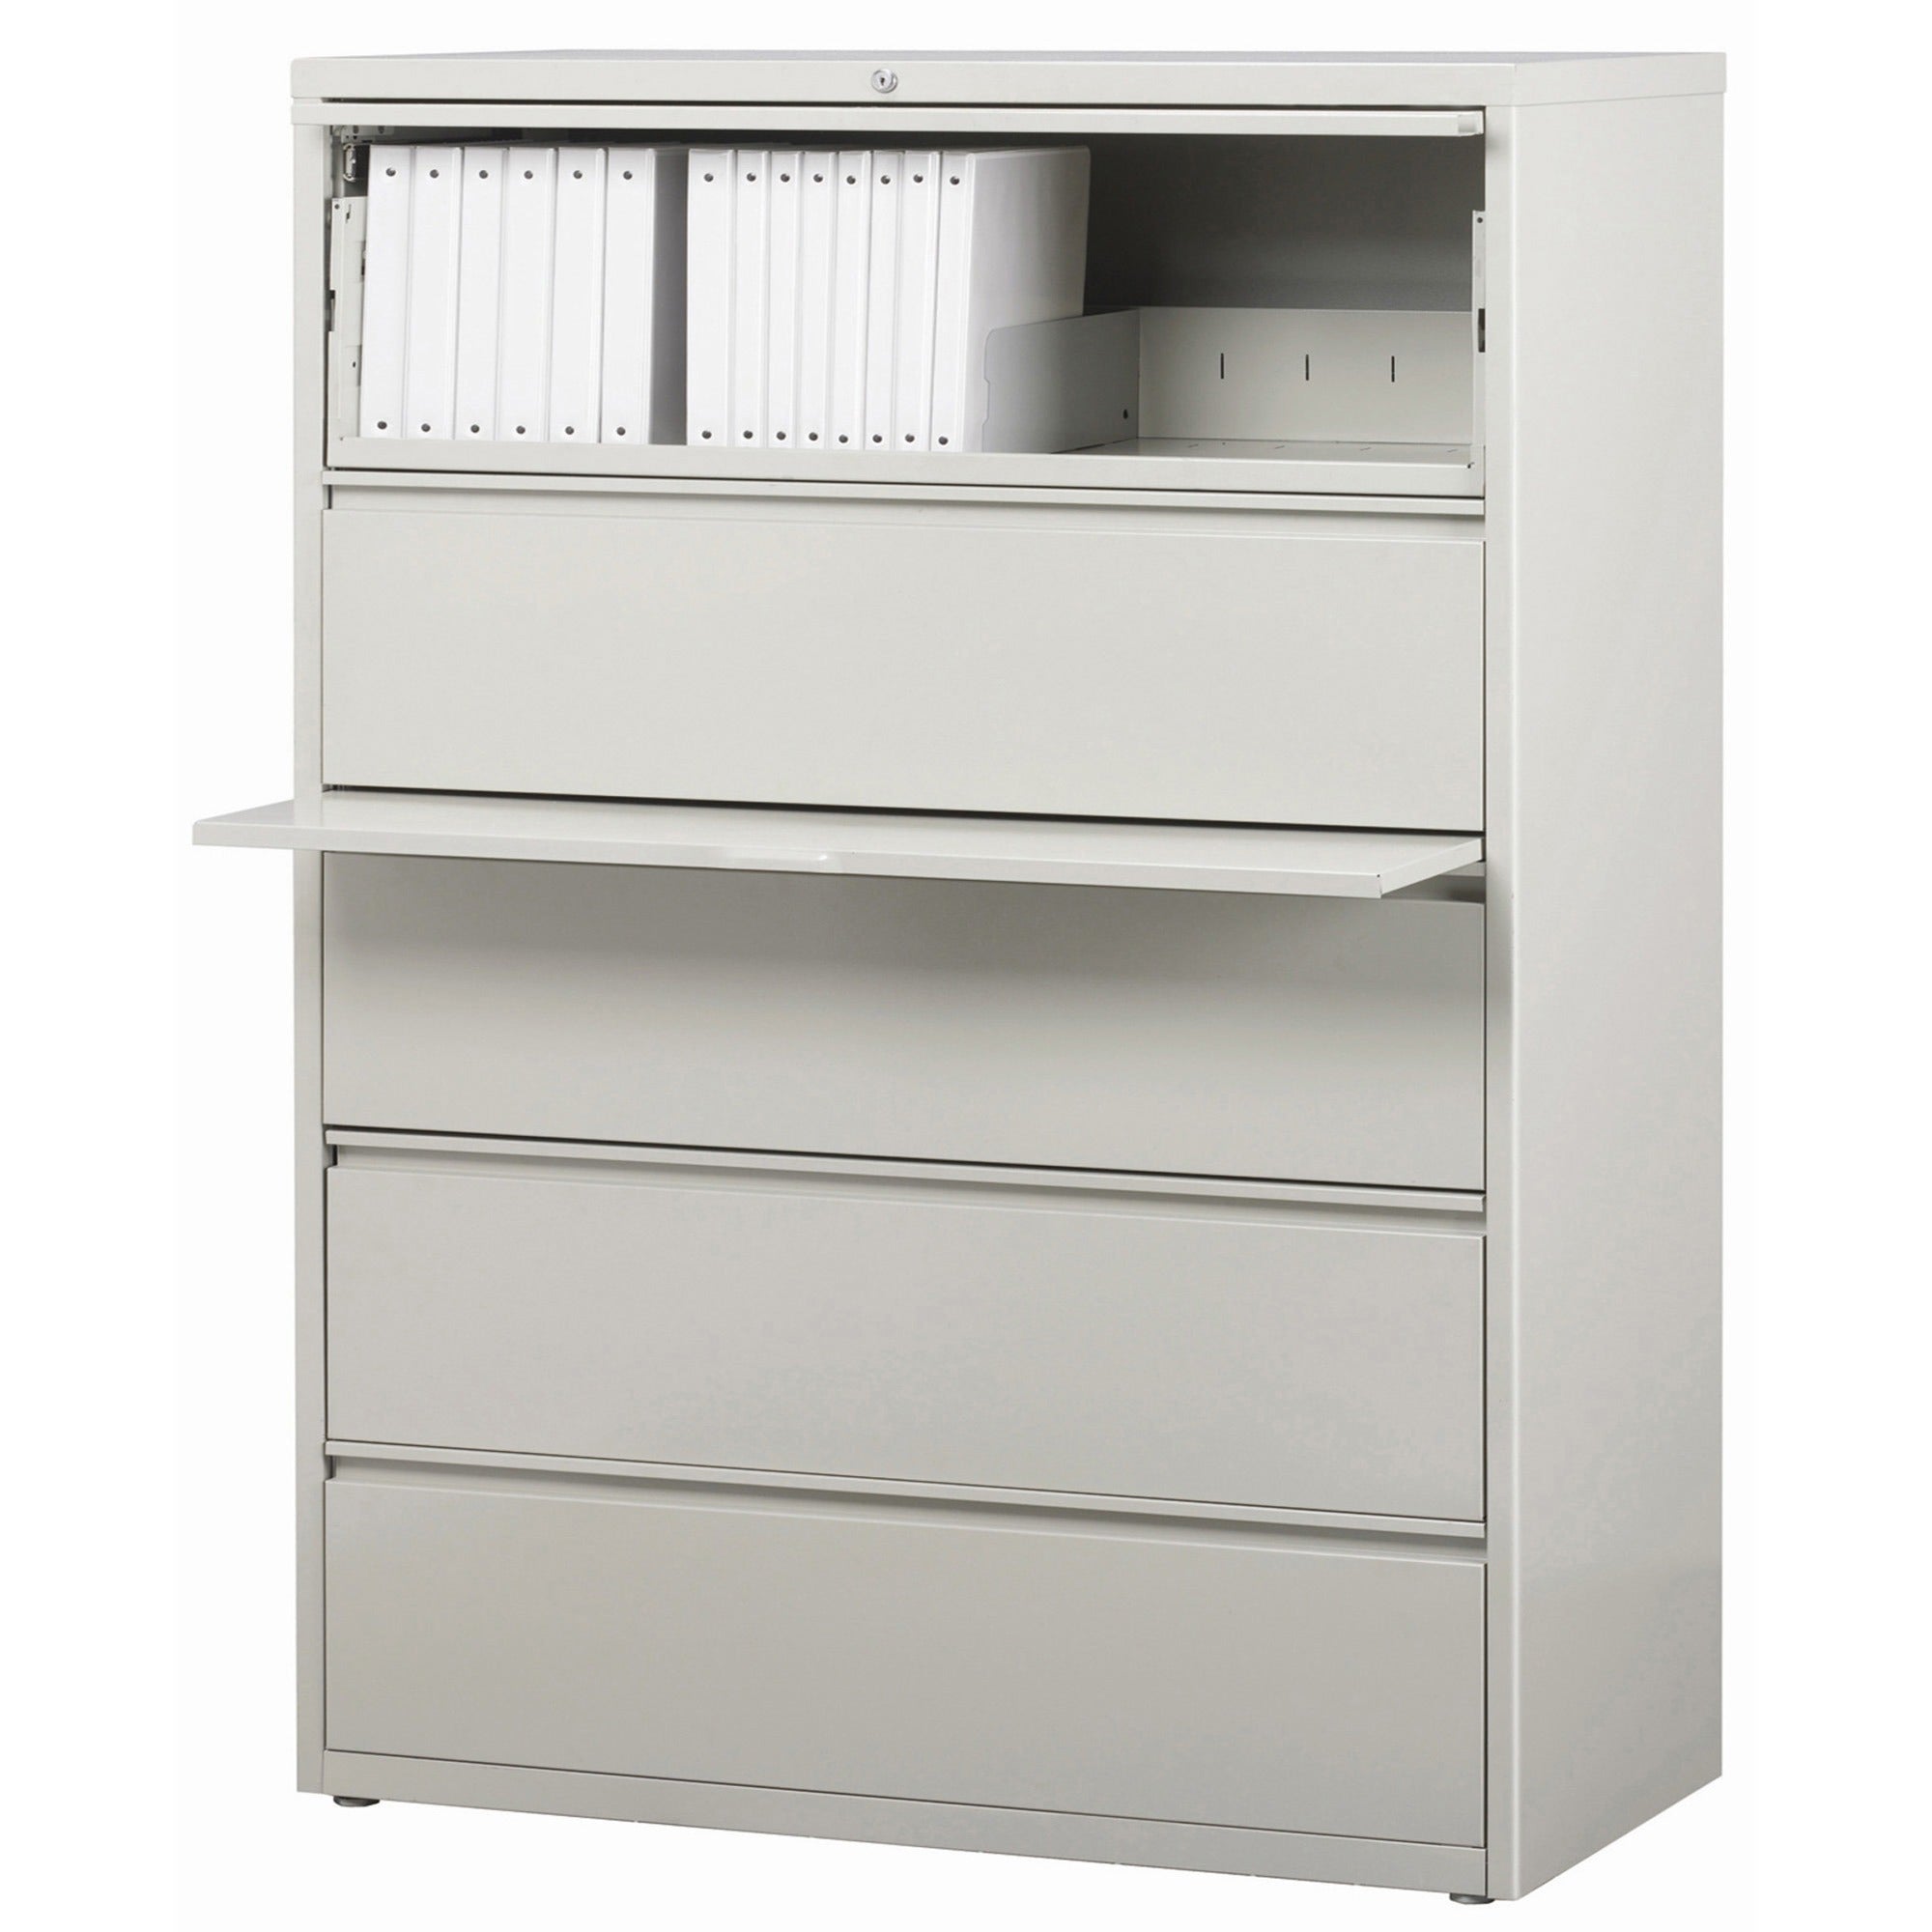 Lorell Fortress Series Lateral File w/Roll-out Posting Shelf - 42" x 18.6" x 67.7" - 5 x Drawer(s) for File - Legal, Letter, A4 - Lateral - Rust Proof, Leveling Glide, Interlocking, Ball-bearing Suspension, Label Holder - Light Gray - Steel - Recycle - 